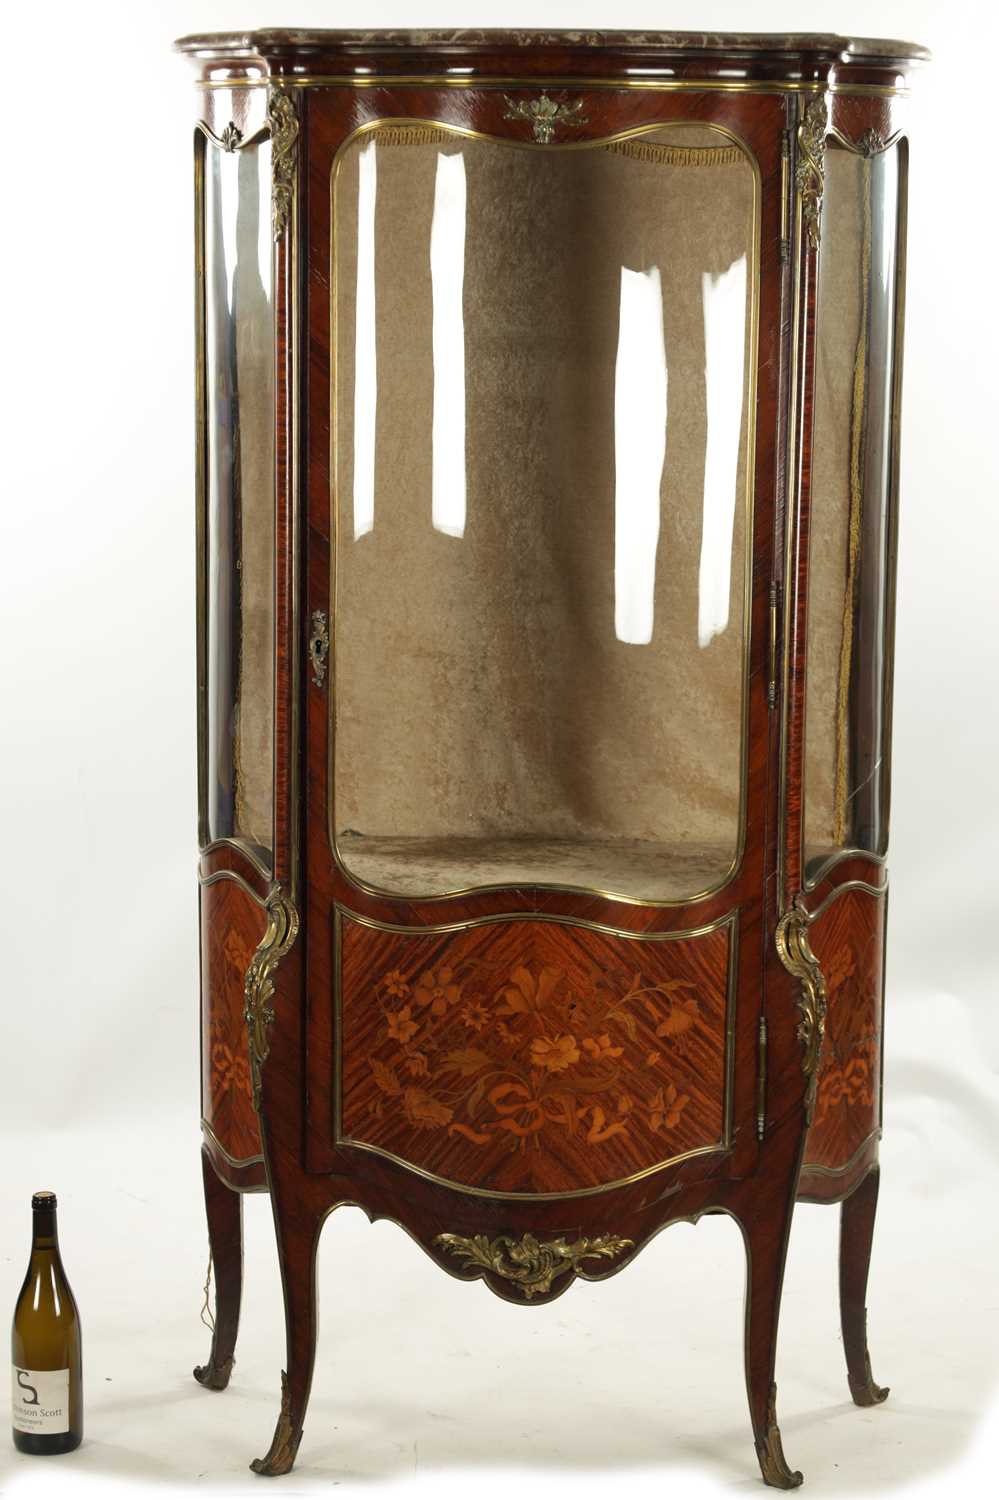 A 19TH CENTURY MARQUETRY INLAID ROSEWOOD RENE MARTIN DISPLAY CABINET / VITRENE - Image 9 of 9